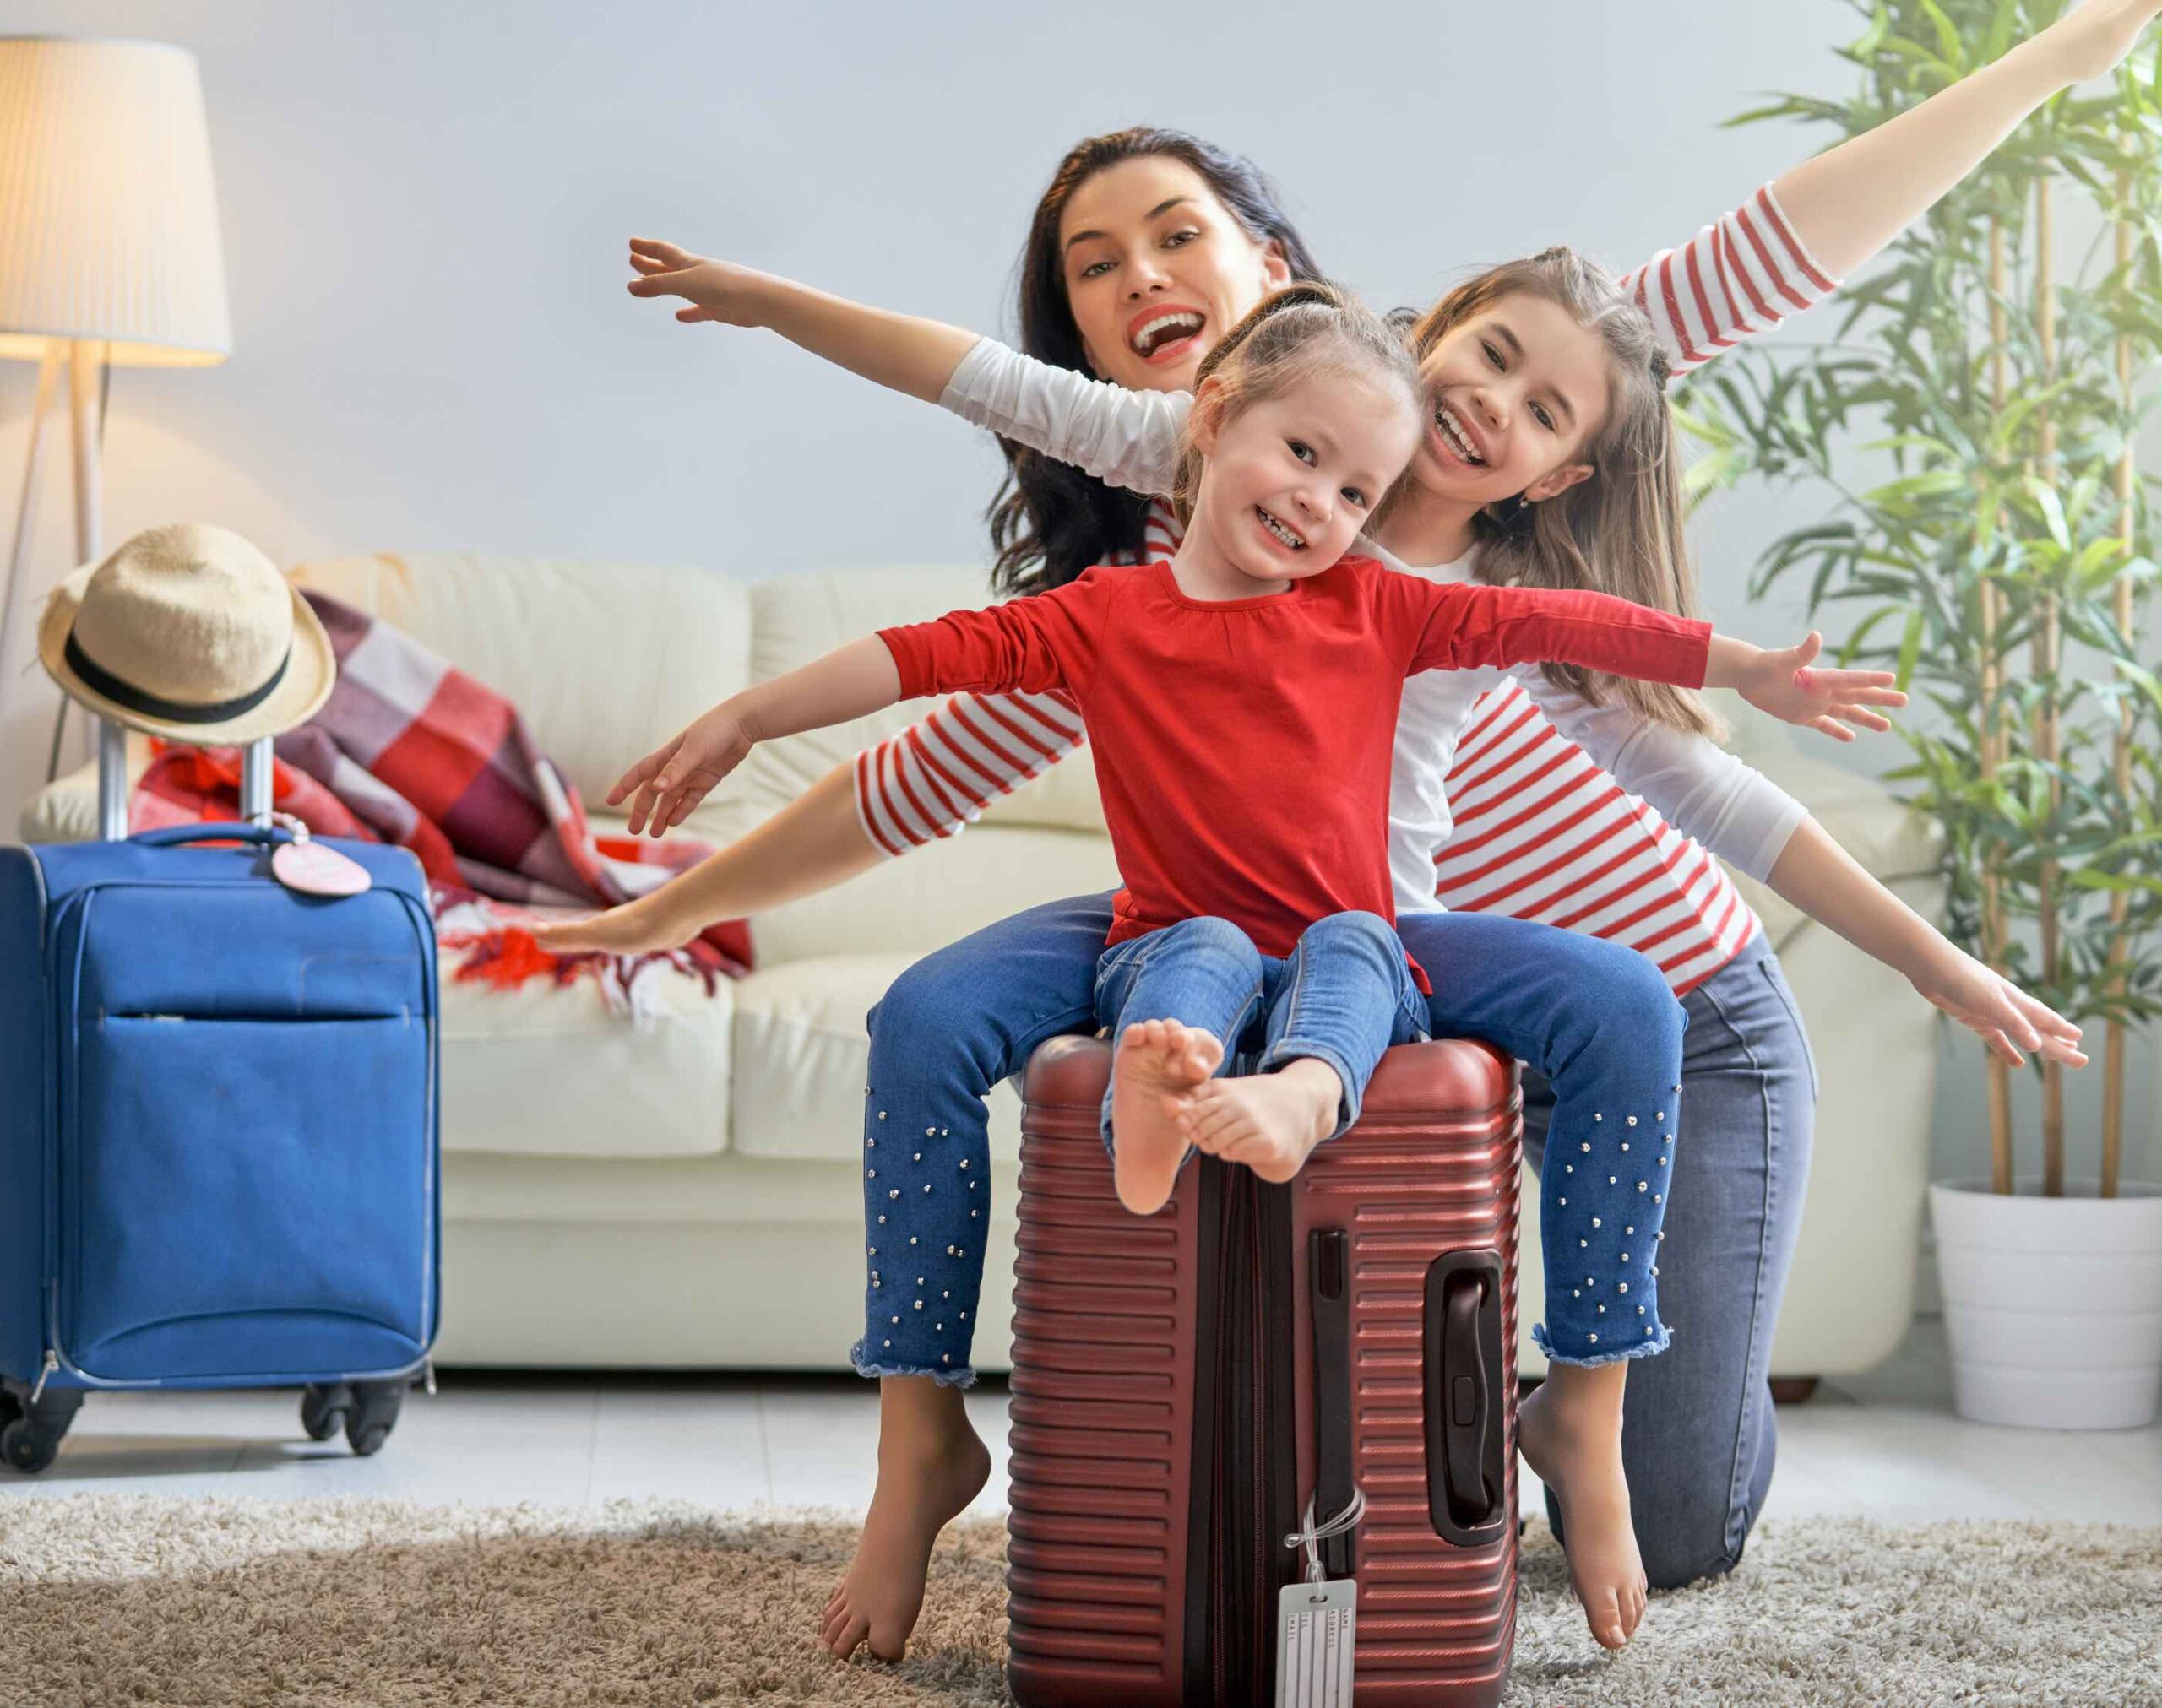 family-luggage-in-living-room-preparing-for-vacation-holidays